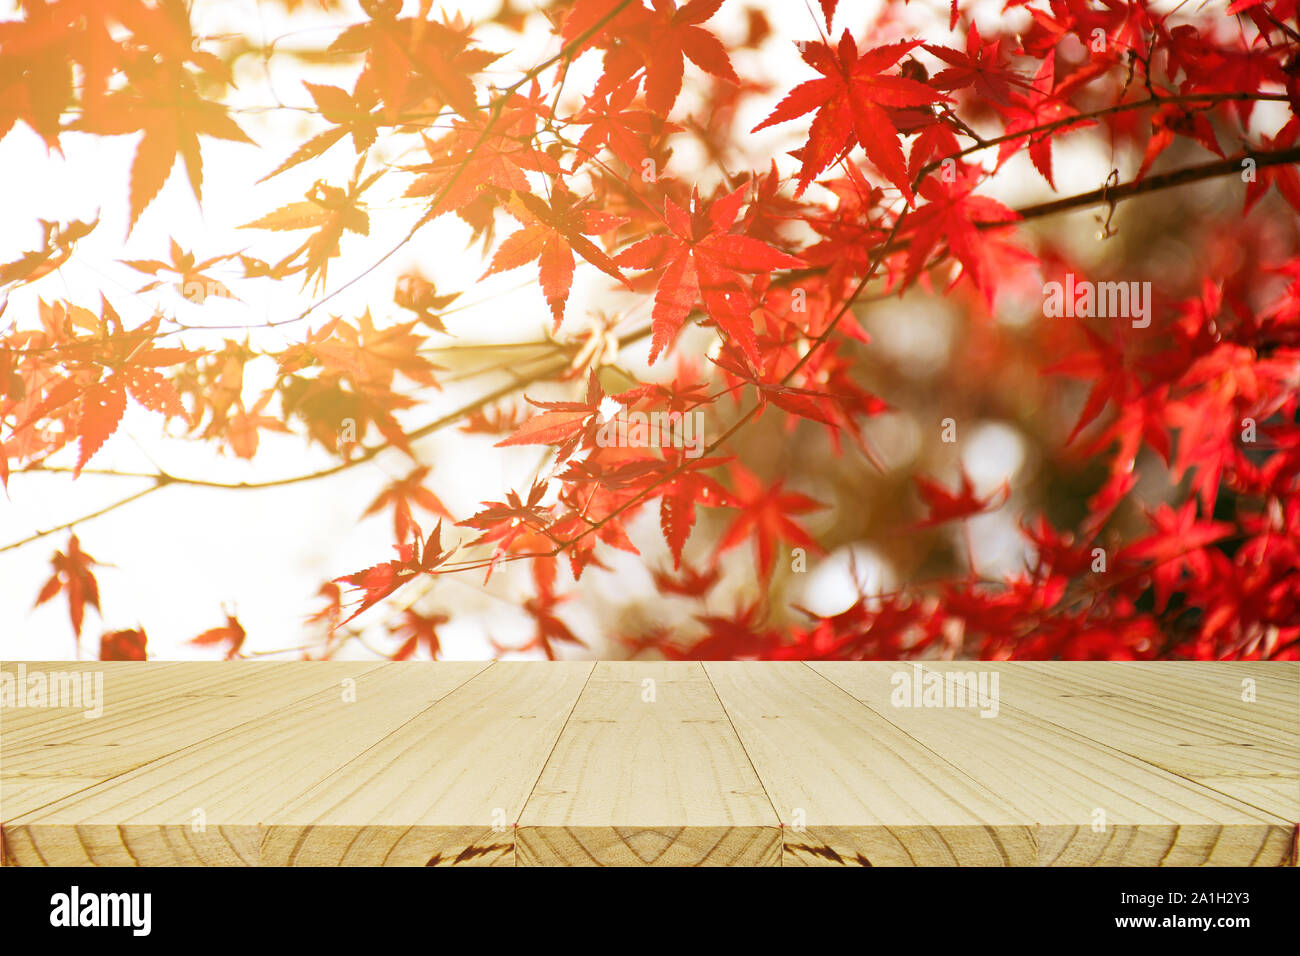 Picnic table with Japanese maple tree garden in autumn. Fully red Maple leaves in Autumn. Autumn background with warm evening light. Stock Photo